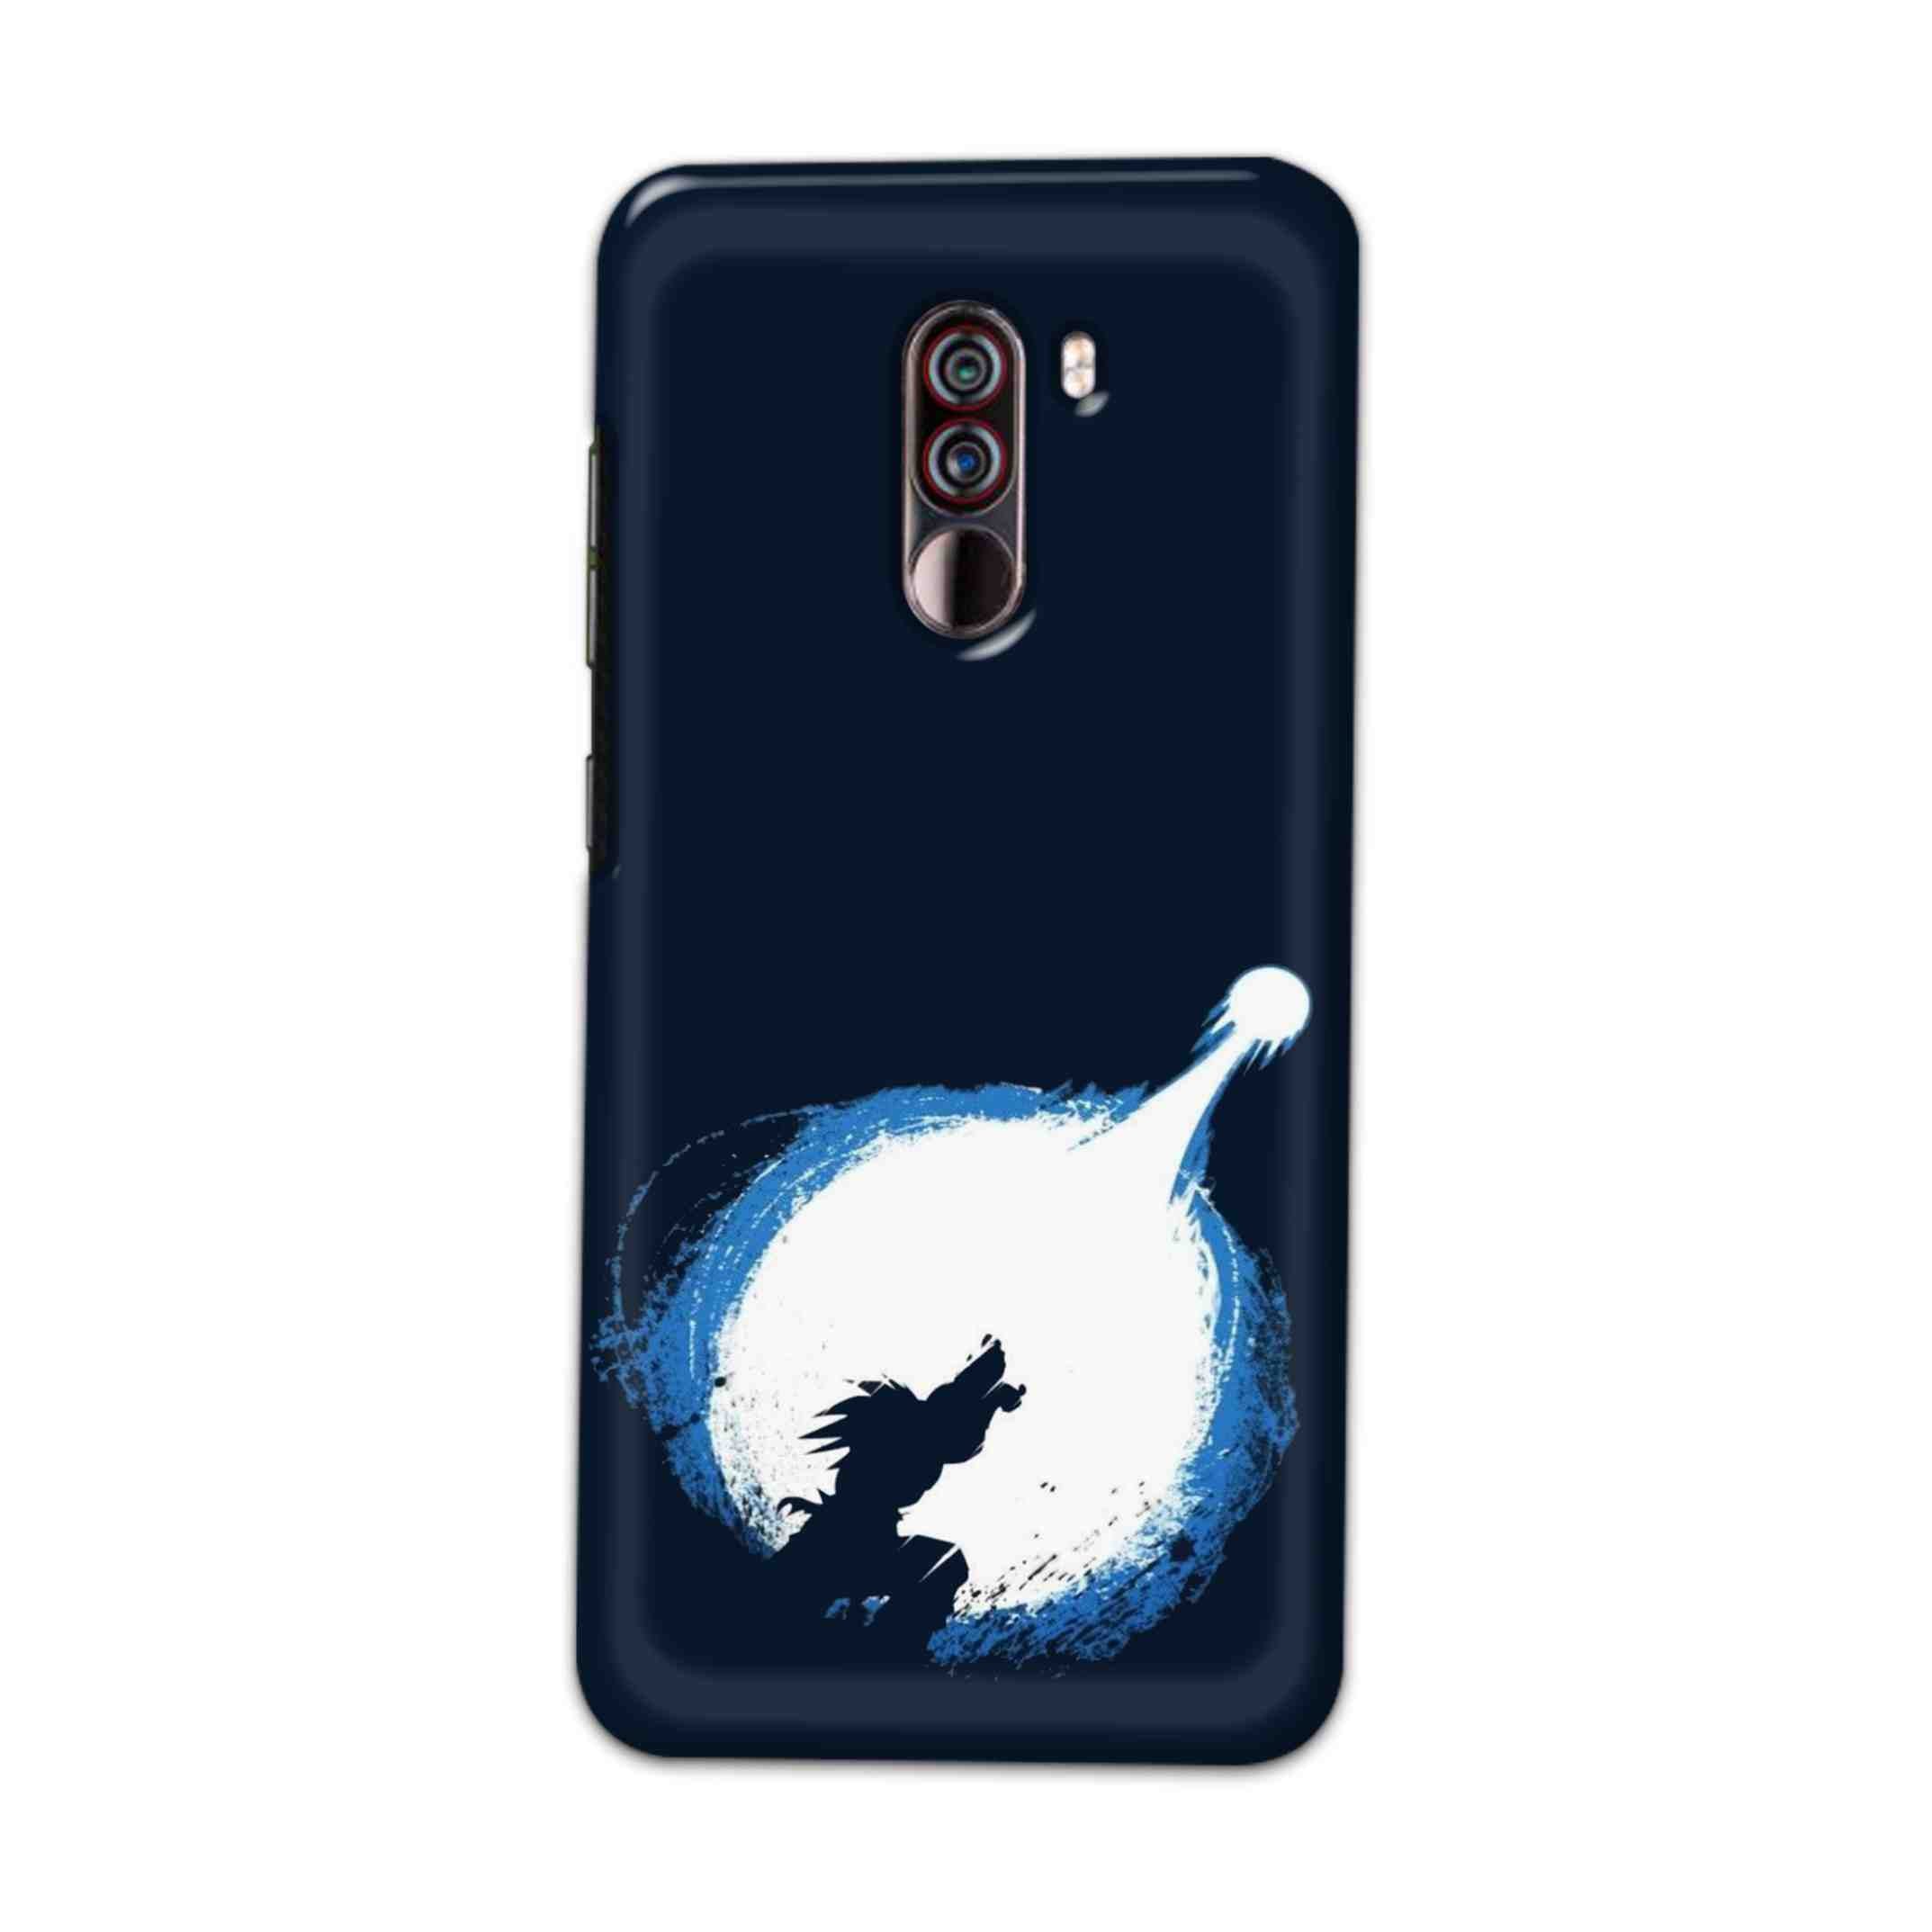 Buy Goku Power Hard Back Mobile Phone Case Cover For Xiaomi Pocophone F1 Online